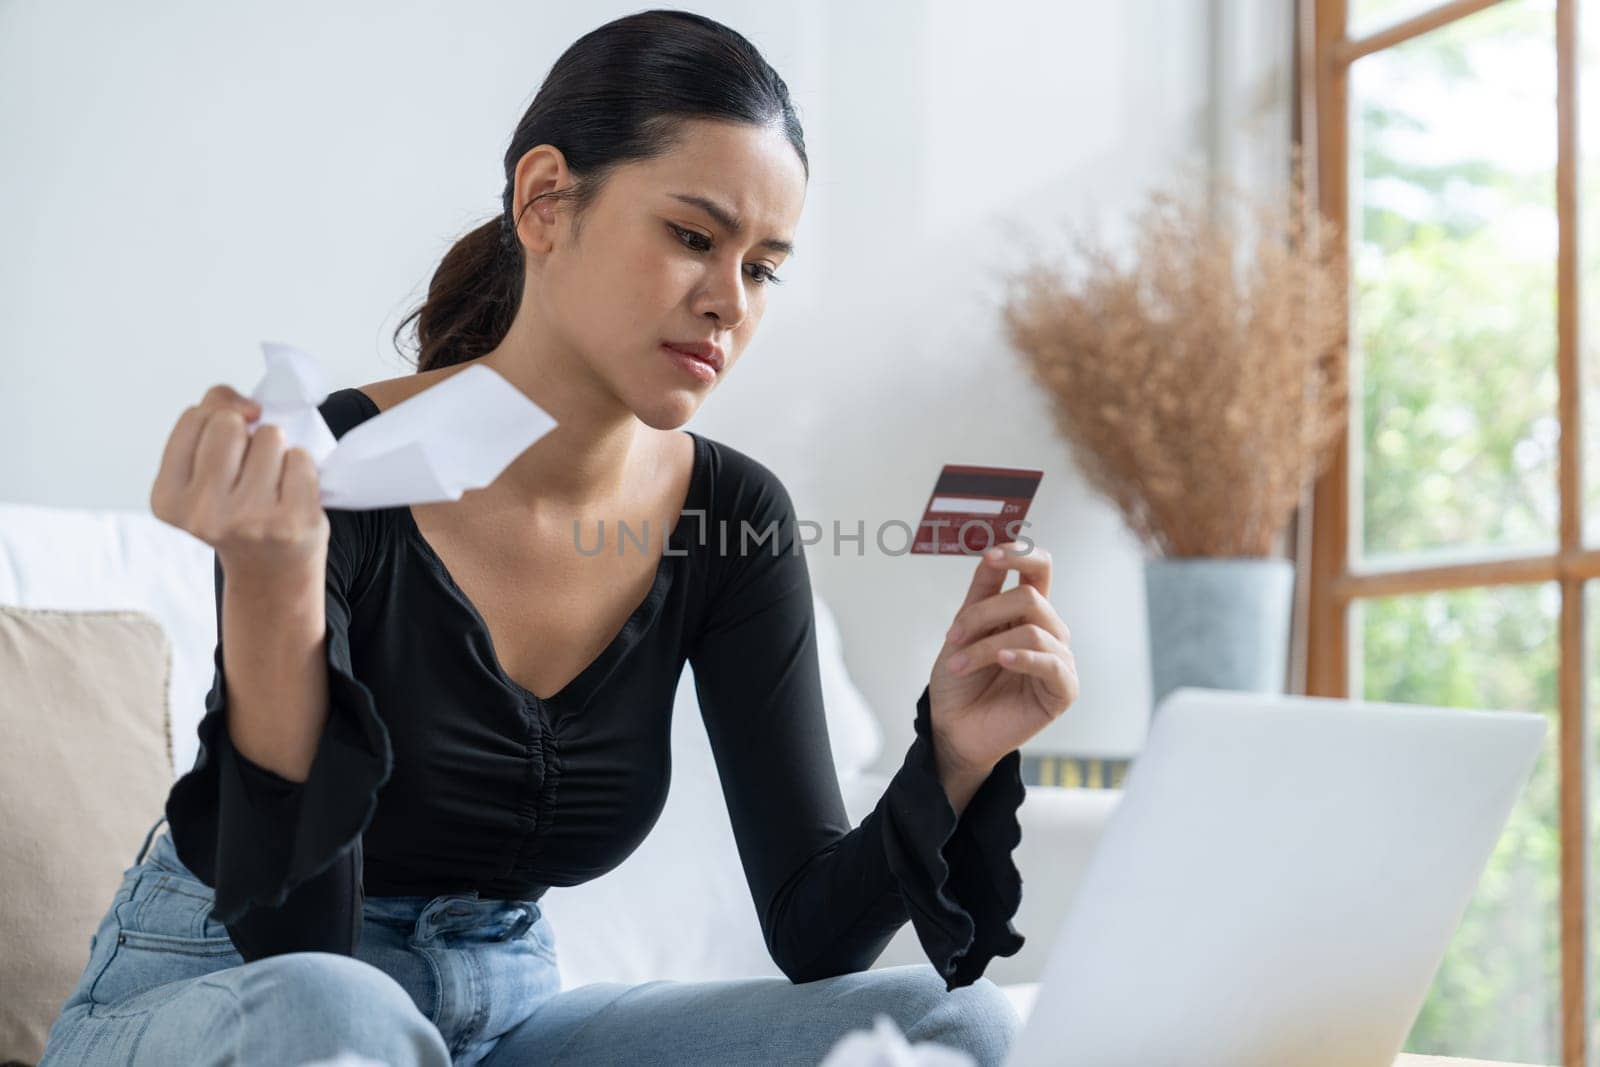 Stressed young woman has financial problems credit card debt to pay uttermost by biancoblue